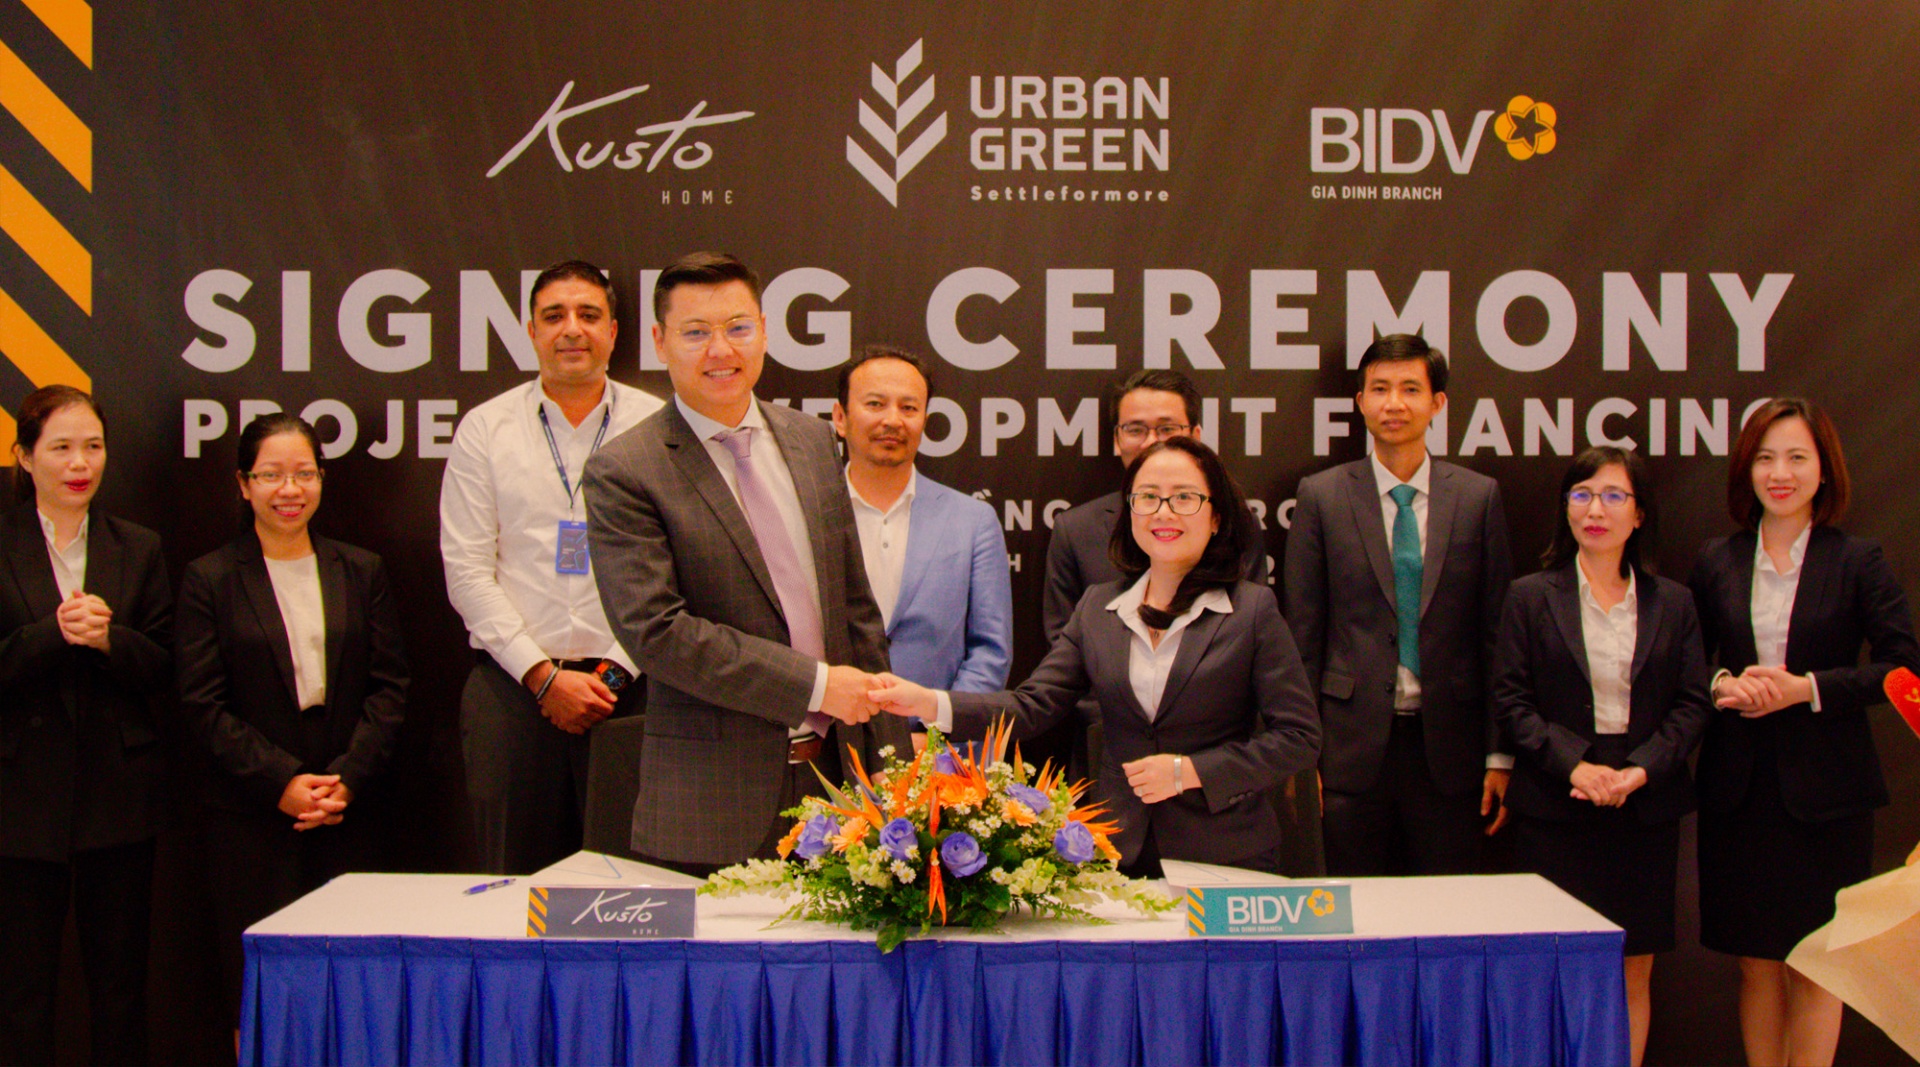 kusto home and bidv gia dinh branch sign deal for the urban green project